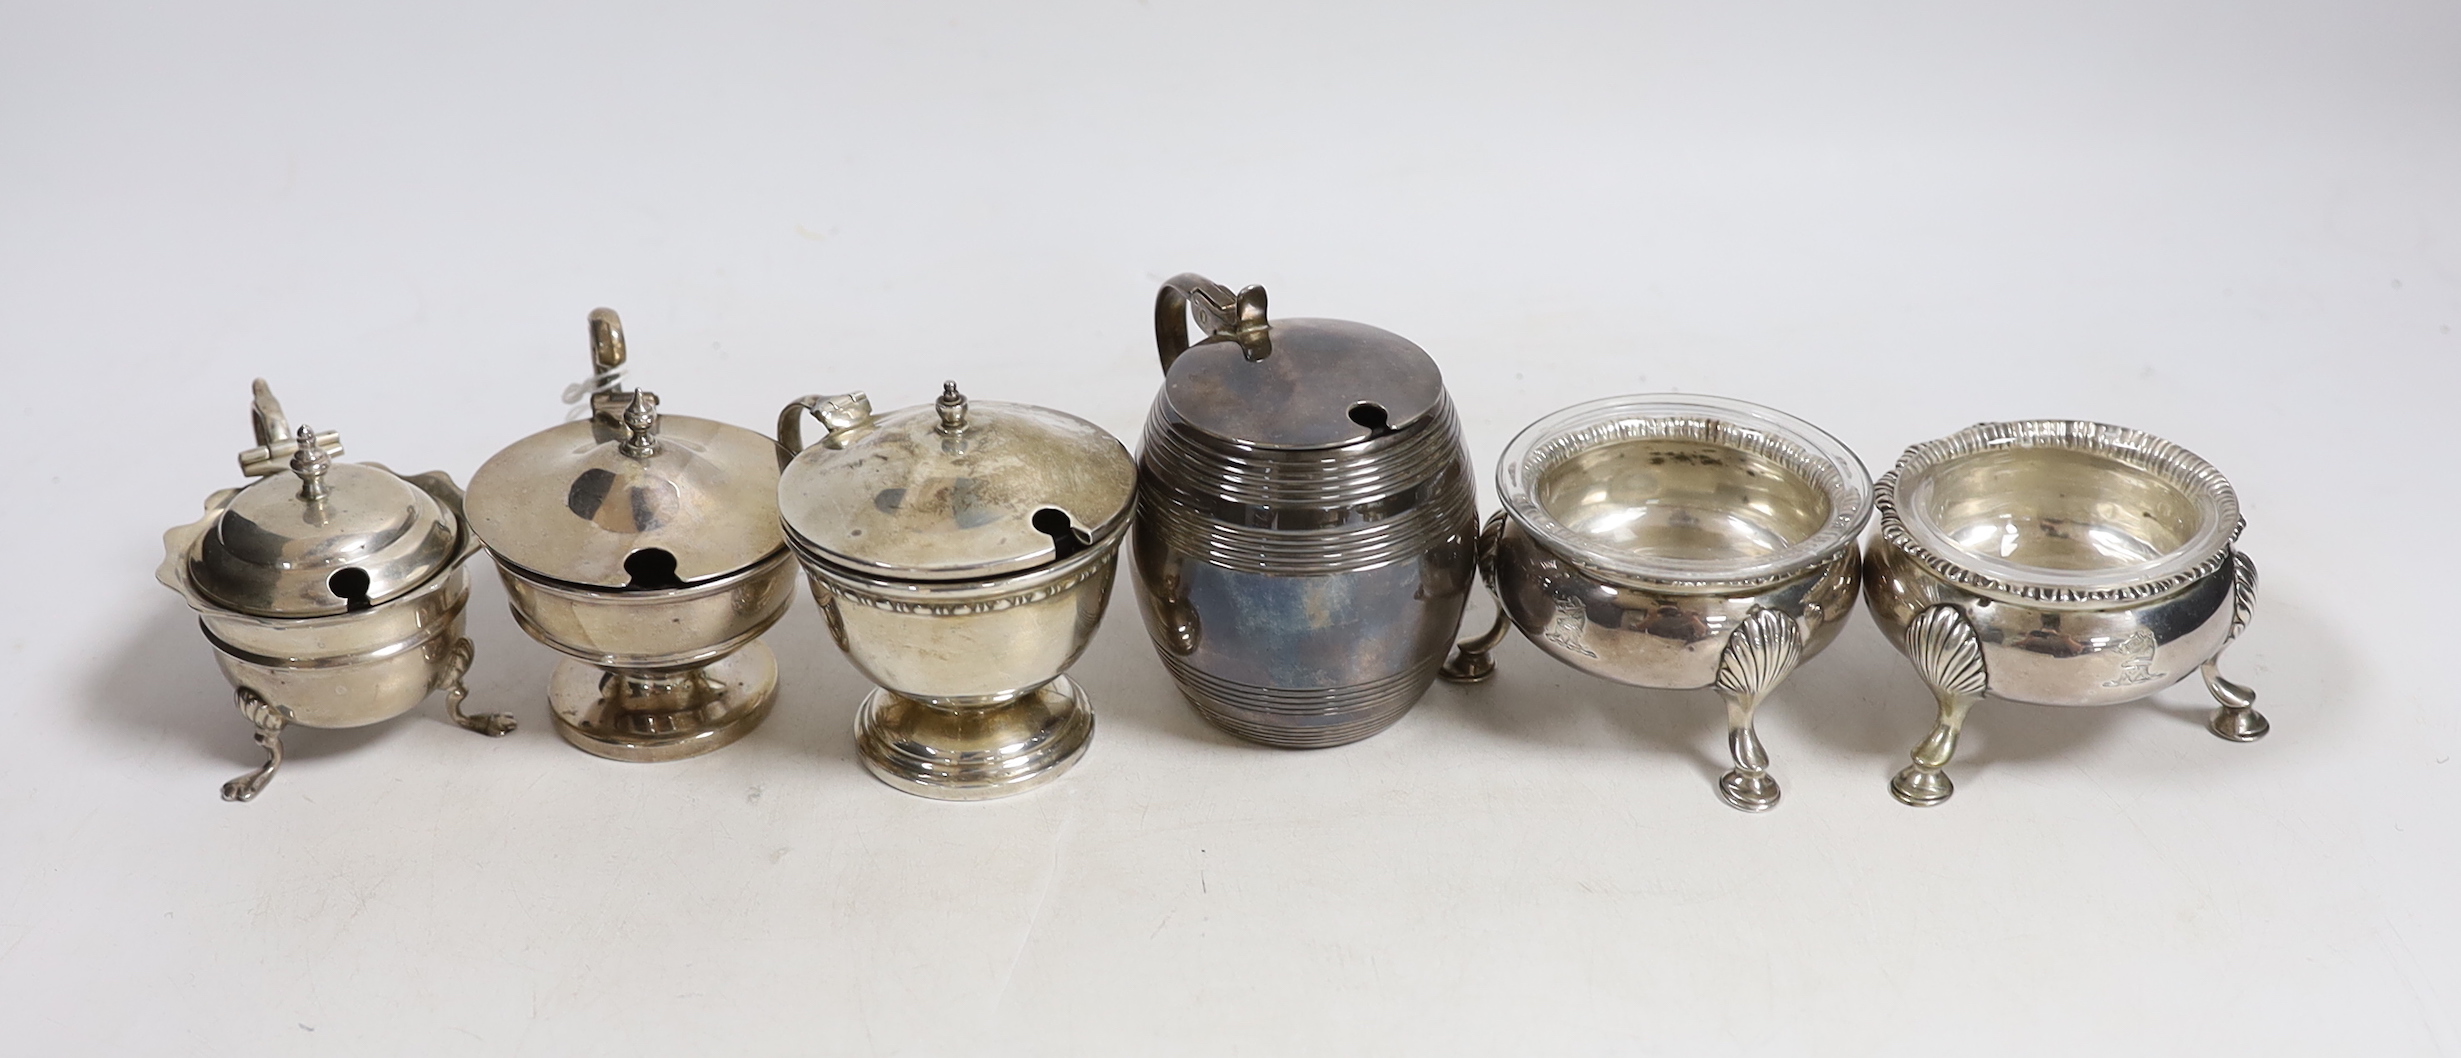 A pair of George III silver bun salts, London, 1767, together with four assorted George V silver mustard pots.